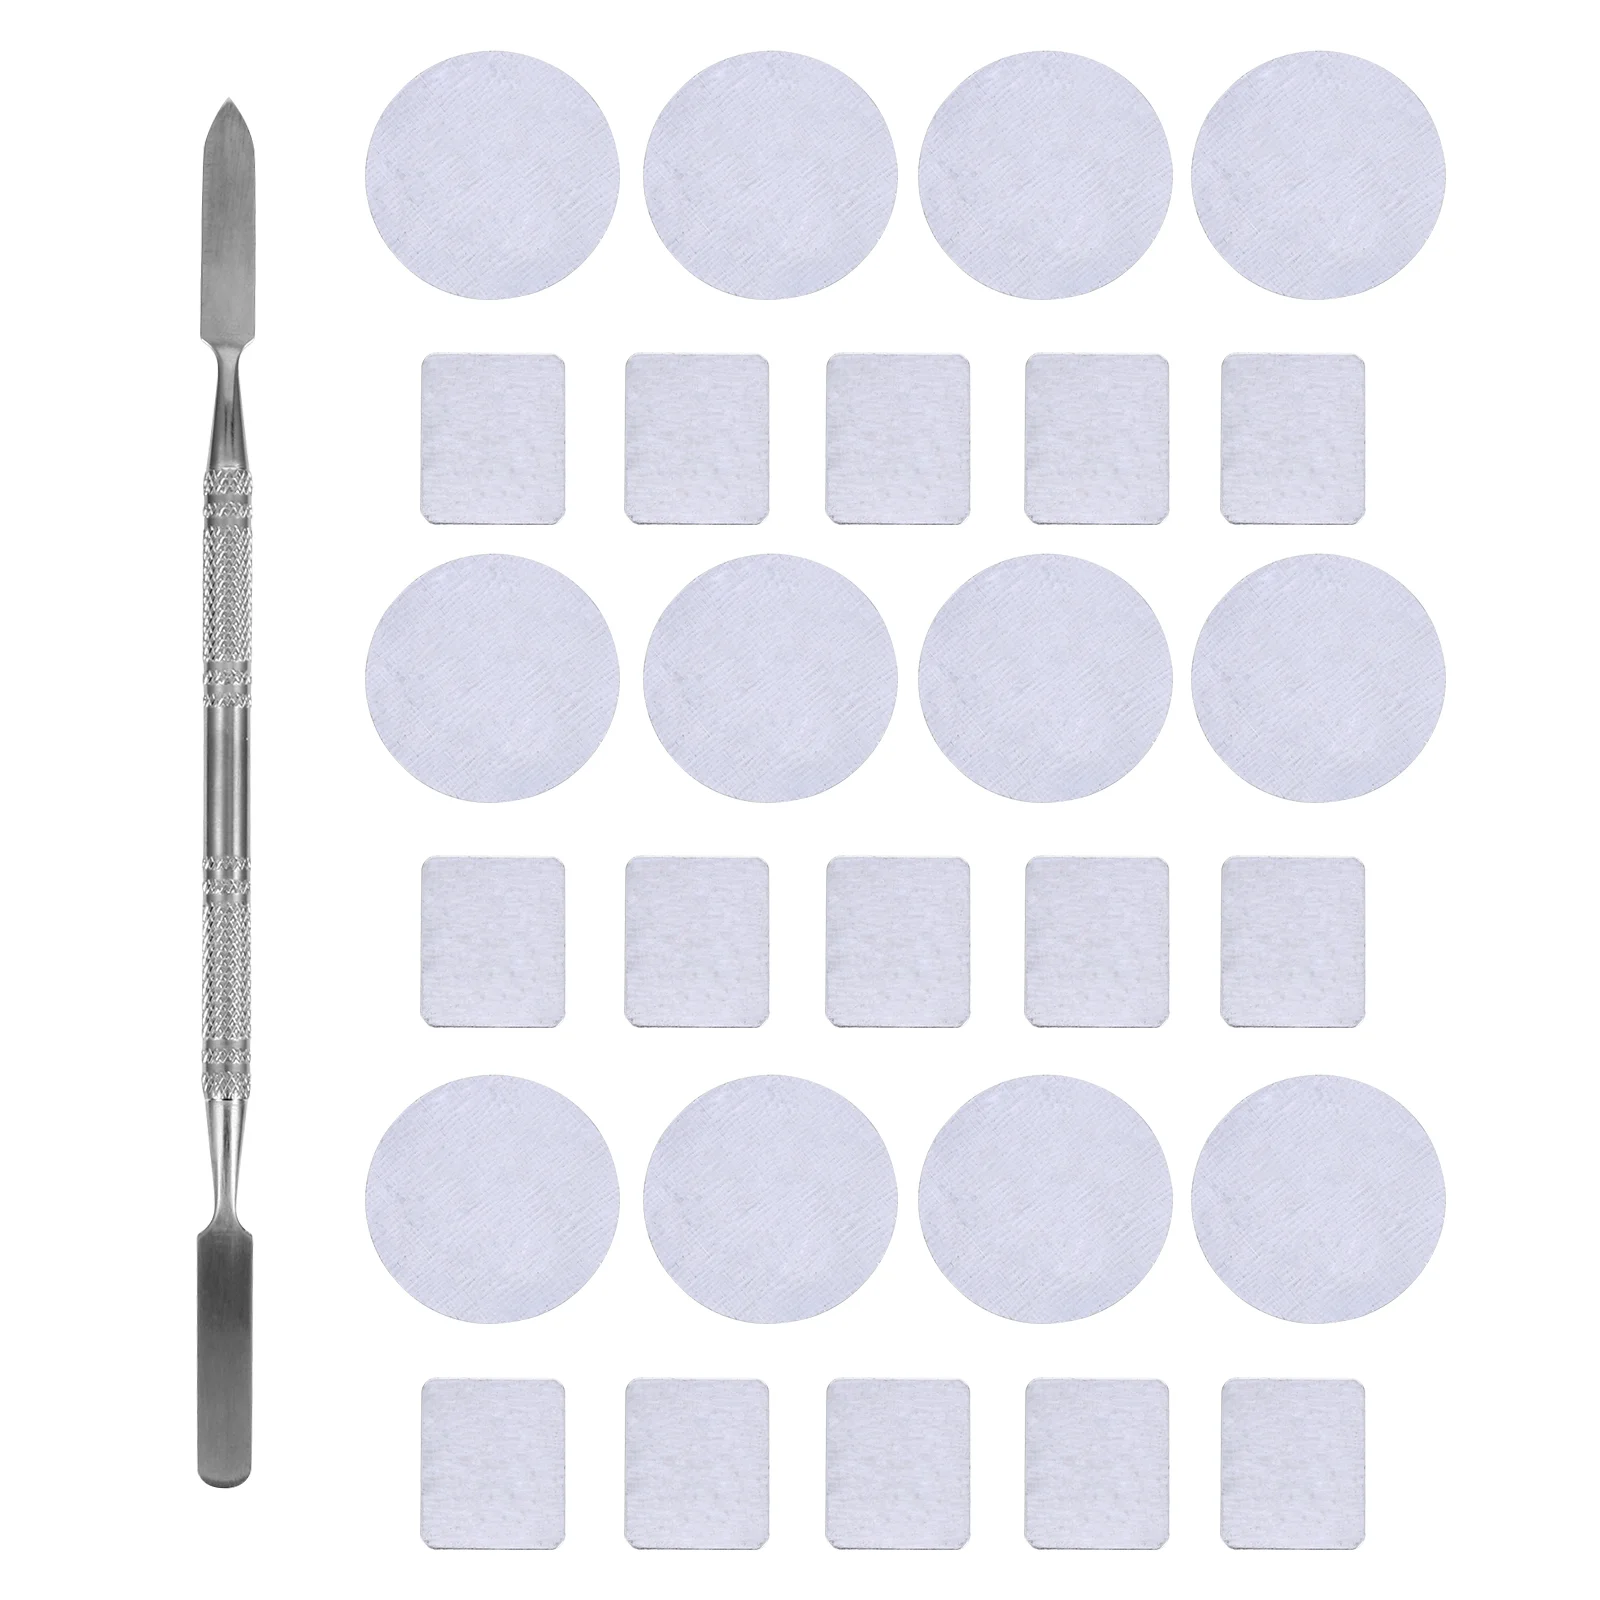 

56 Pcs Makeup Palette Makeup Eyeshadow Makeup Sticker Square Magnets Palettes Empty Metal Stainless Steel Makeup Mixing